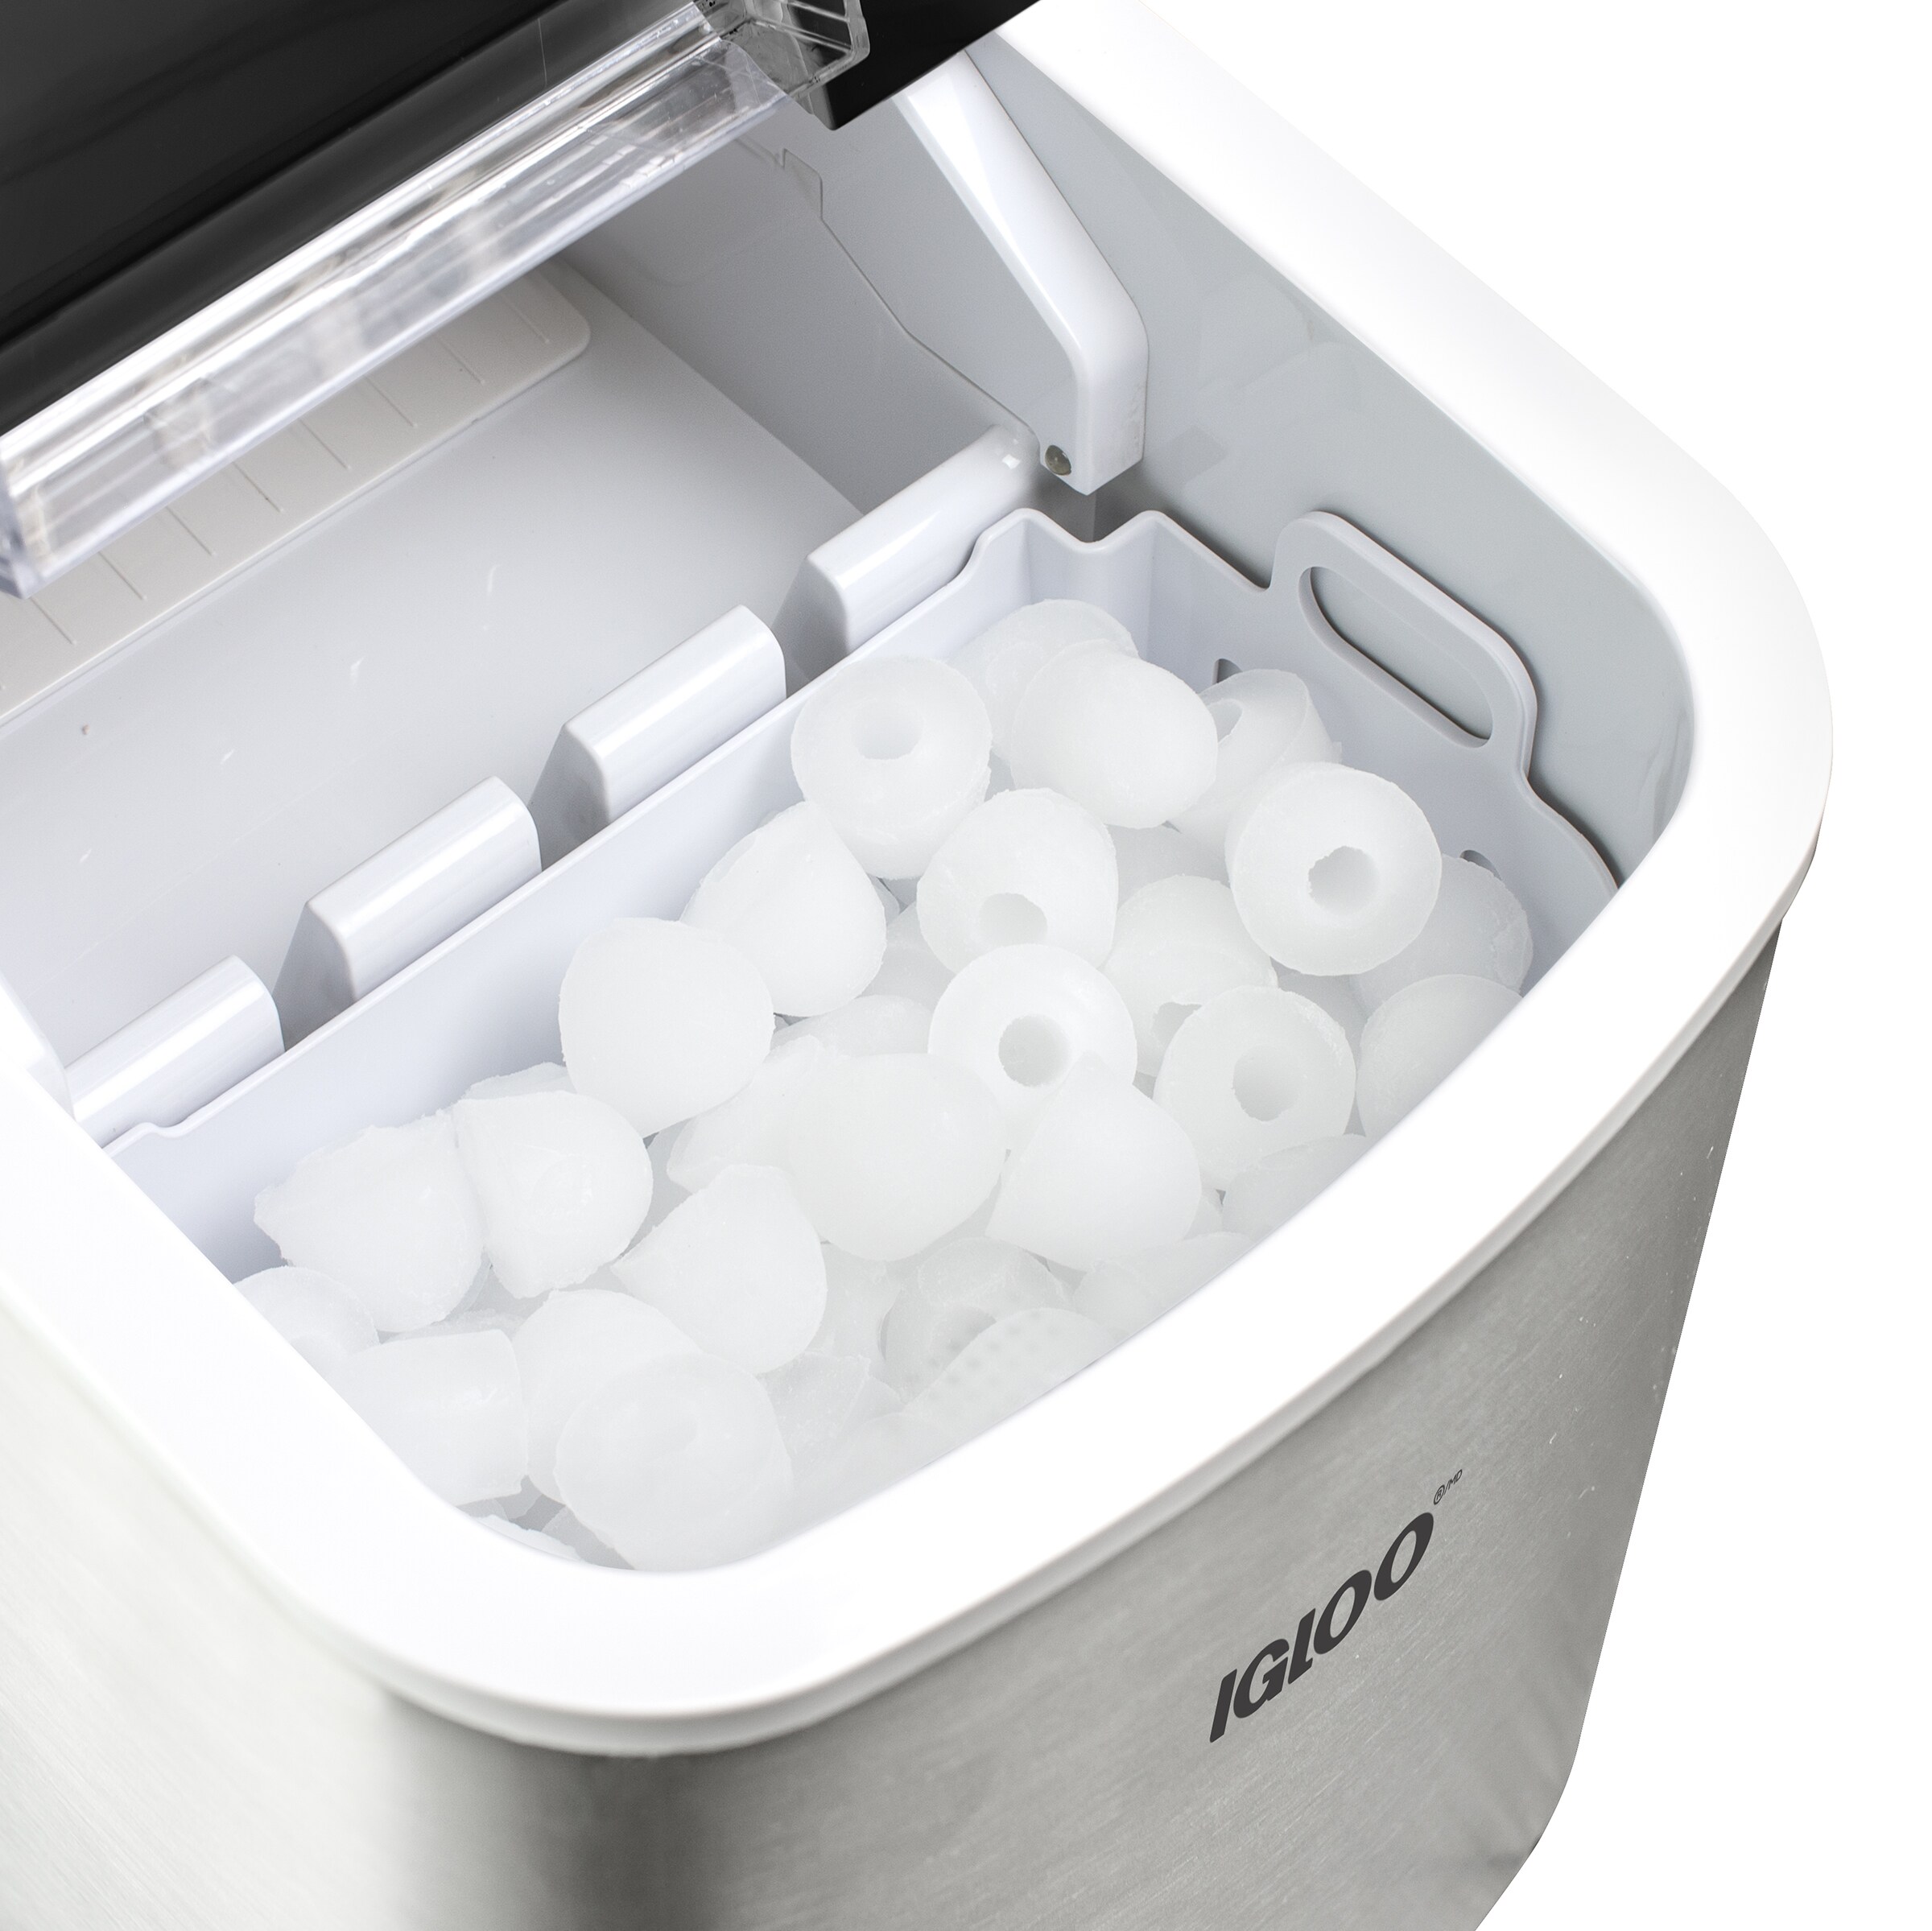 Igloo Ice Makers at